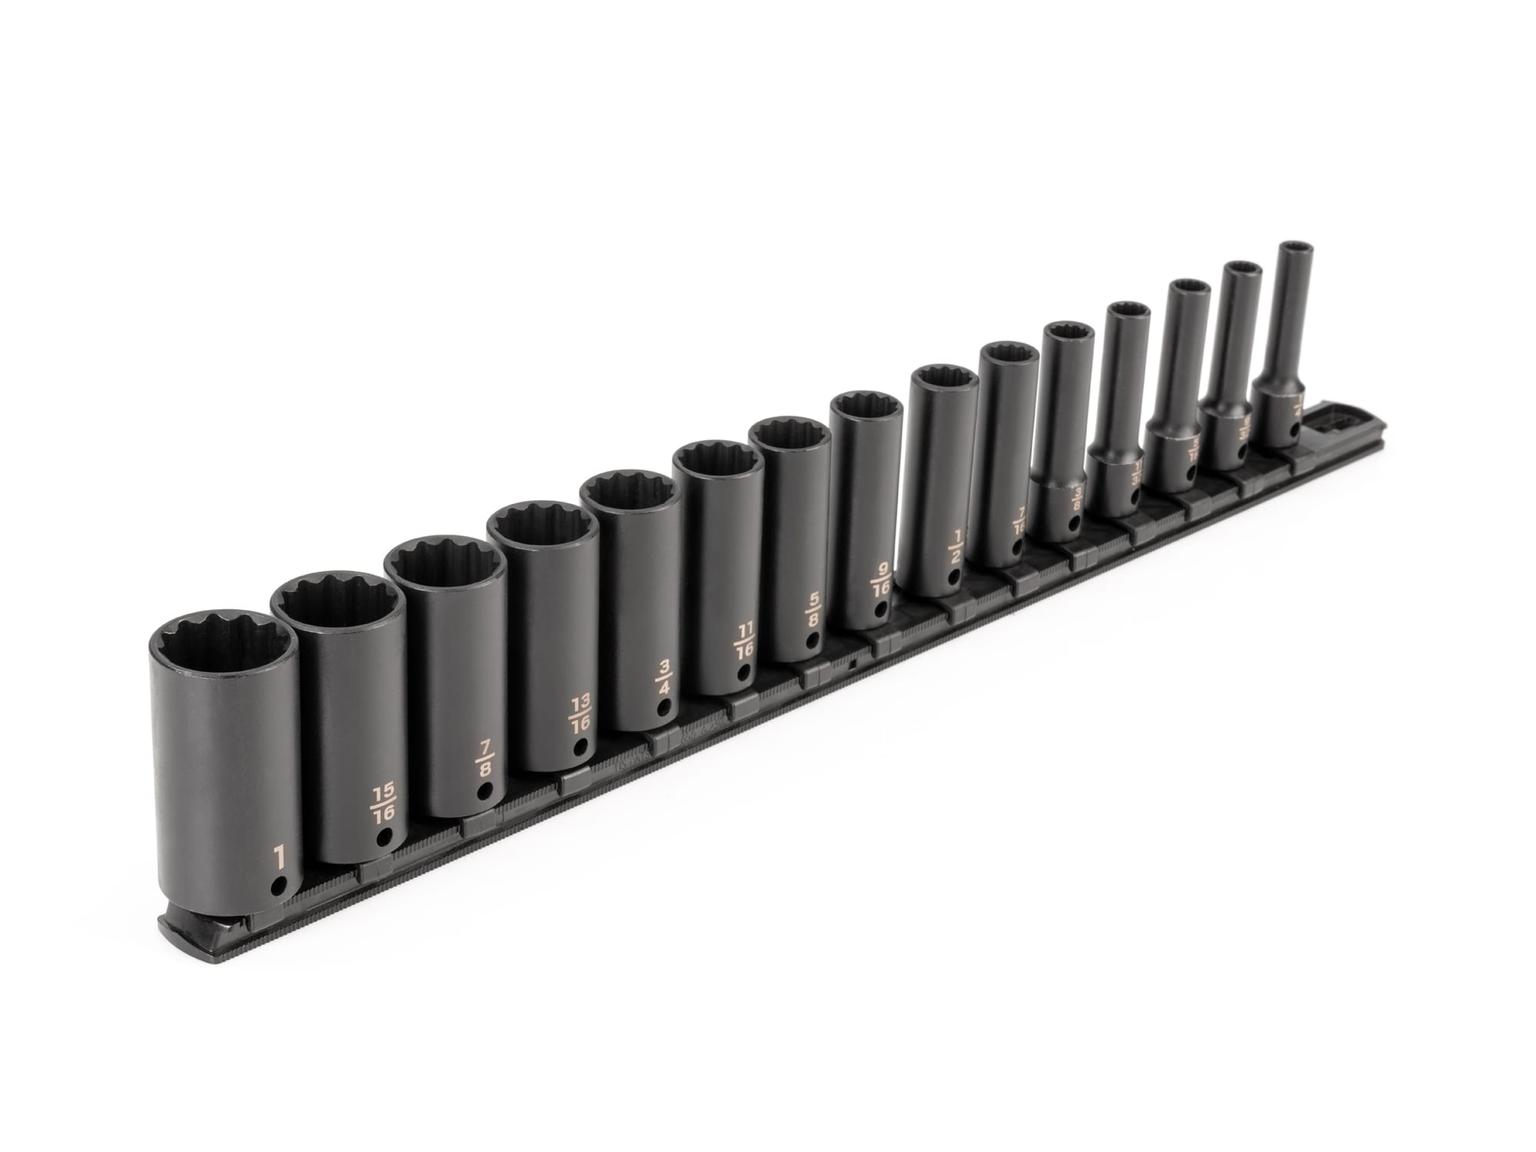 TEKTON SID91113-T 3/8 Inch Drive Deep 12-Point Impact Socket Set with Rail, 15-Piece (1/4-1 in.)